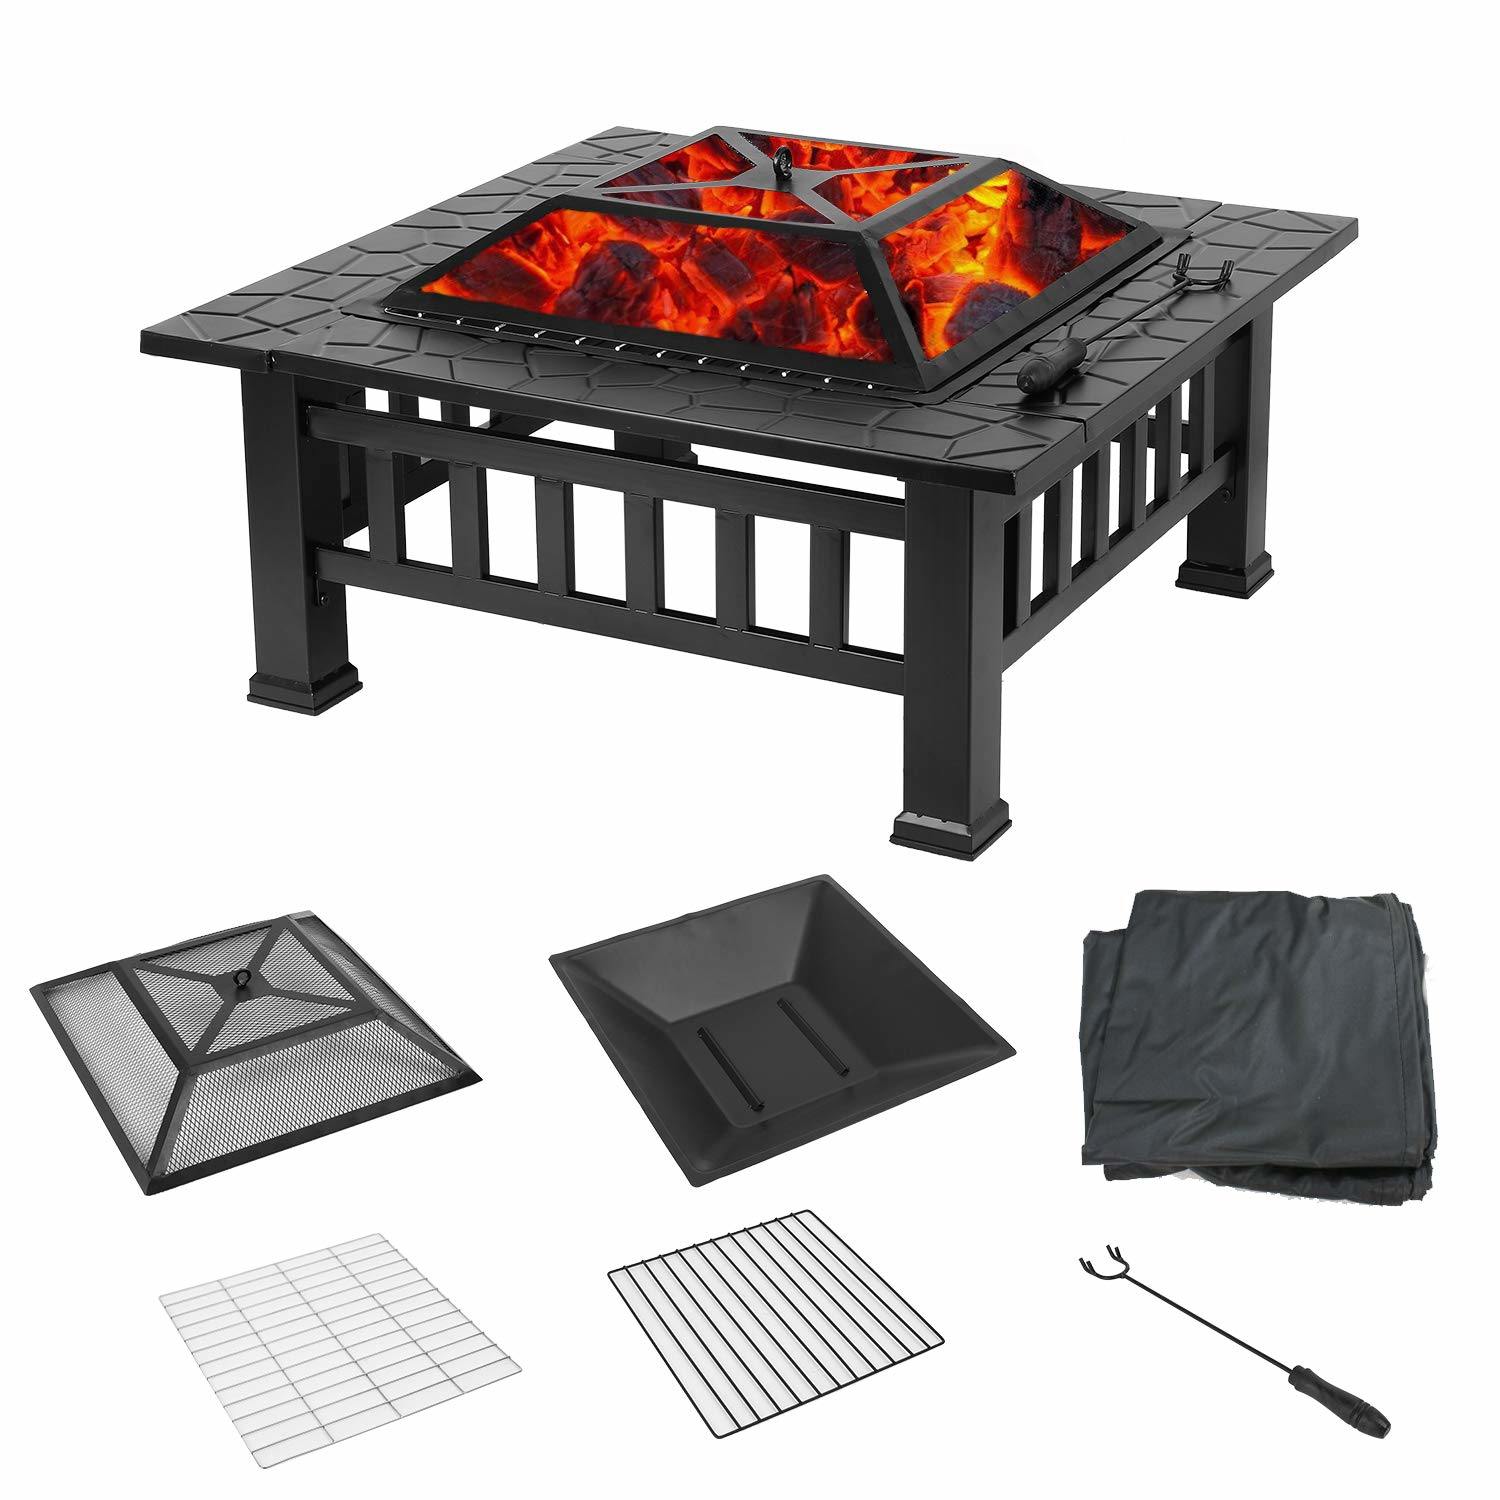 Upland Fire Pit with Cover